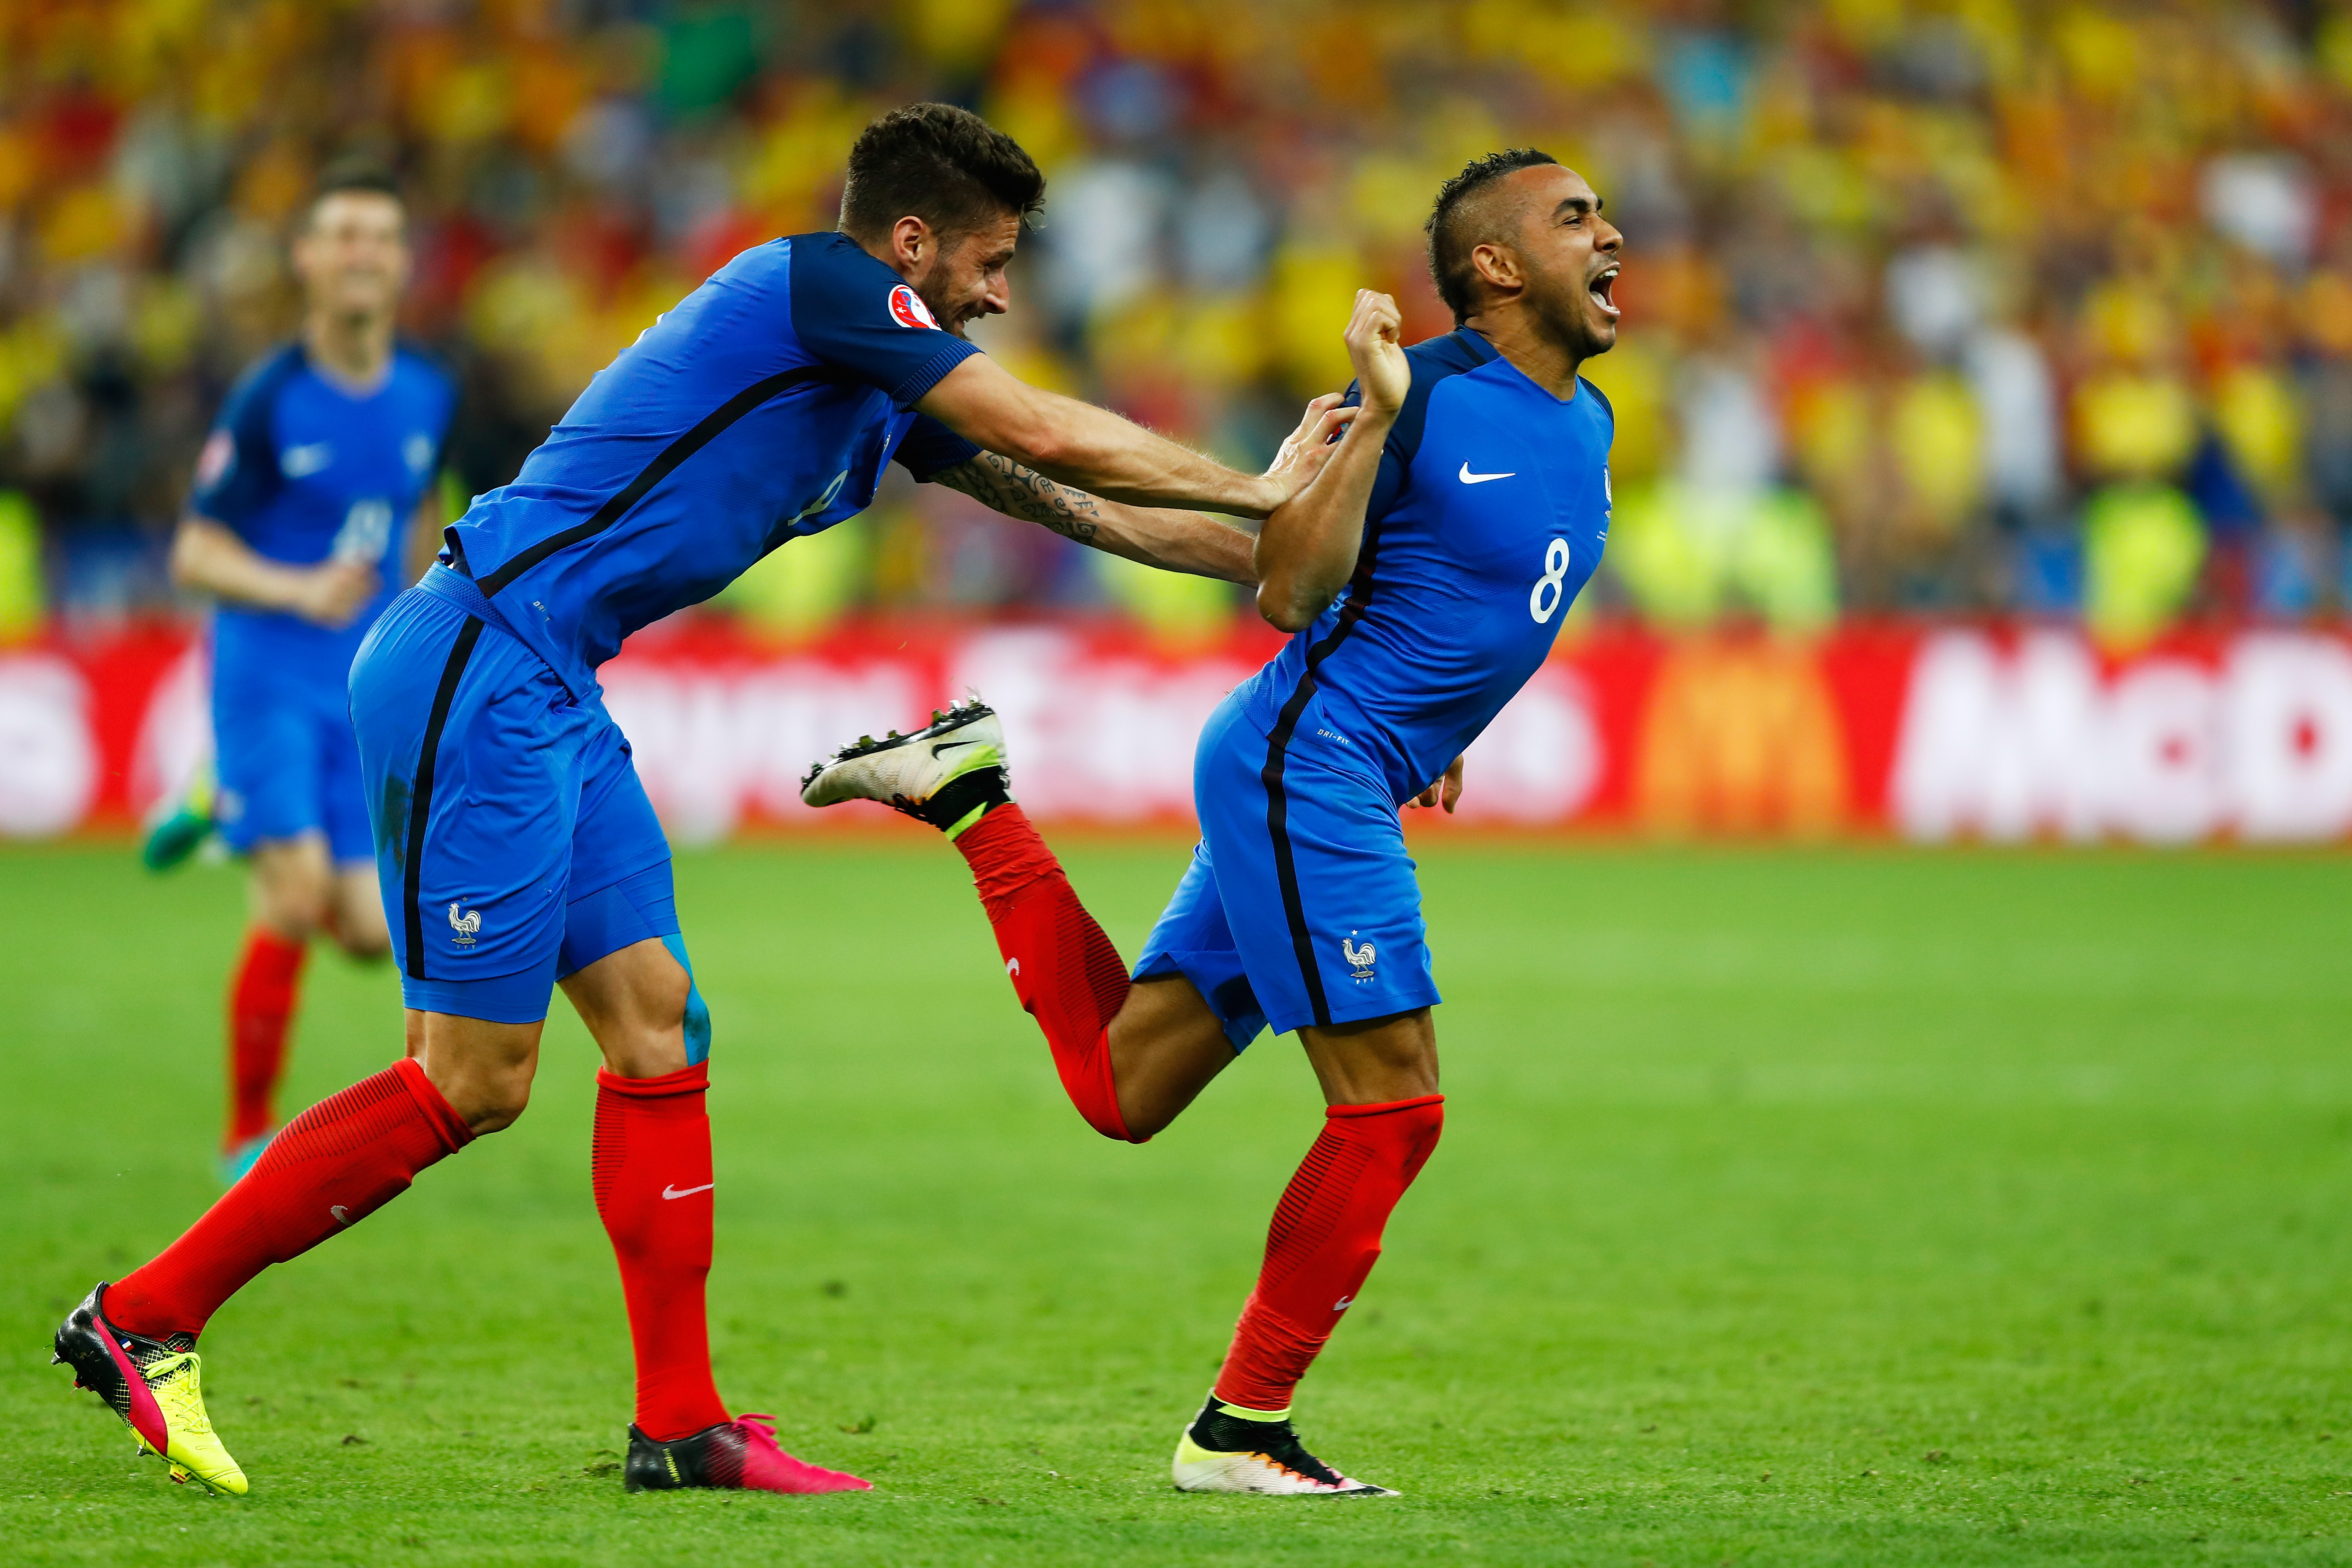 Euro 2016 | Day 1, France v Romania highlights & talking points: Magical Payet; struggling Giroud